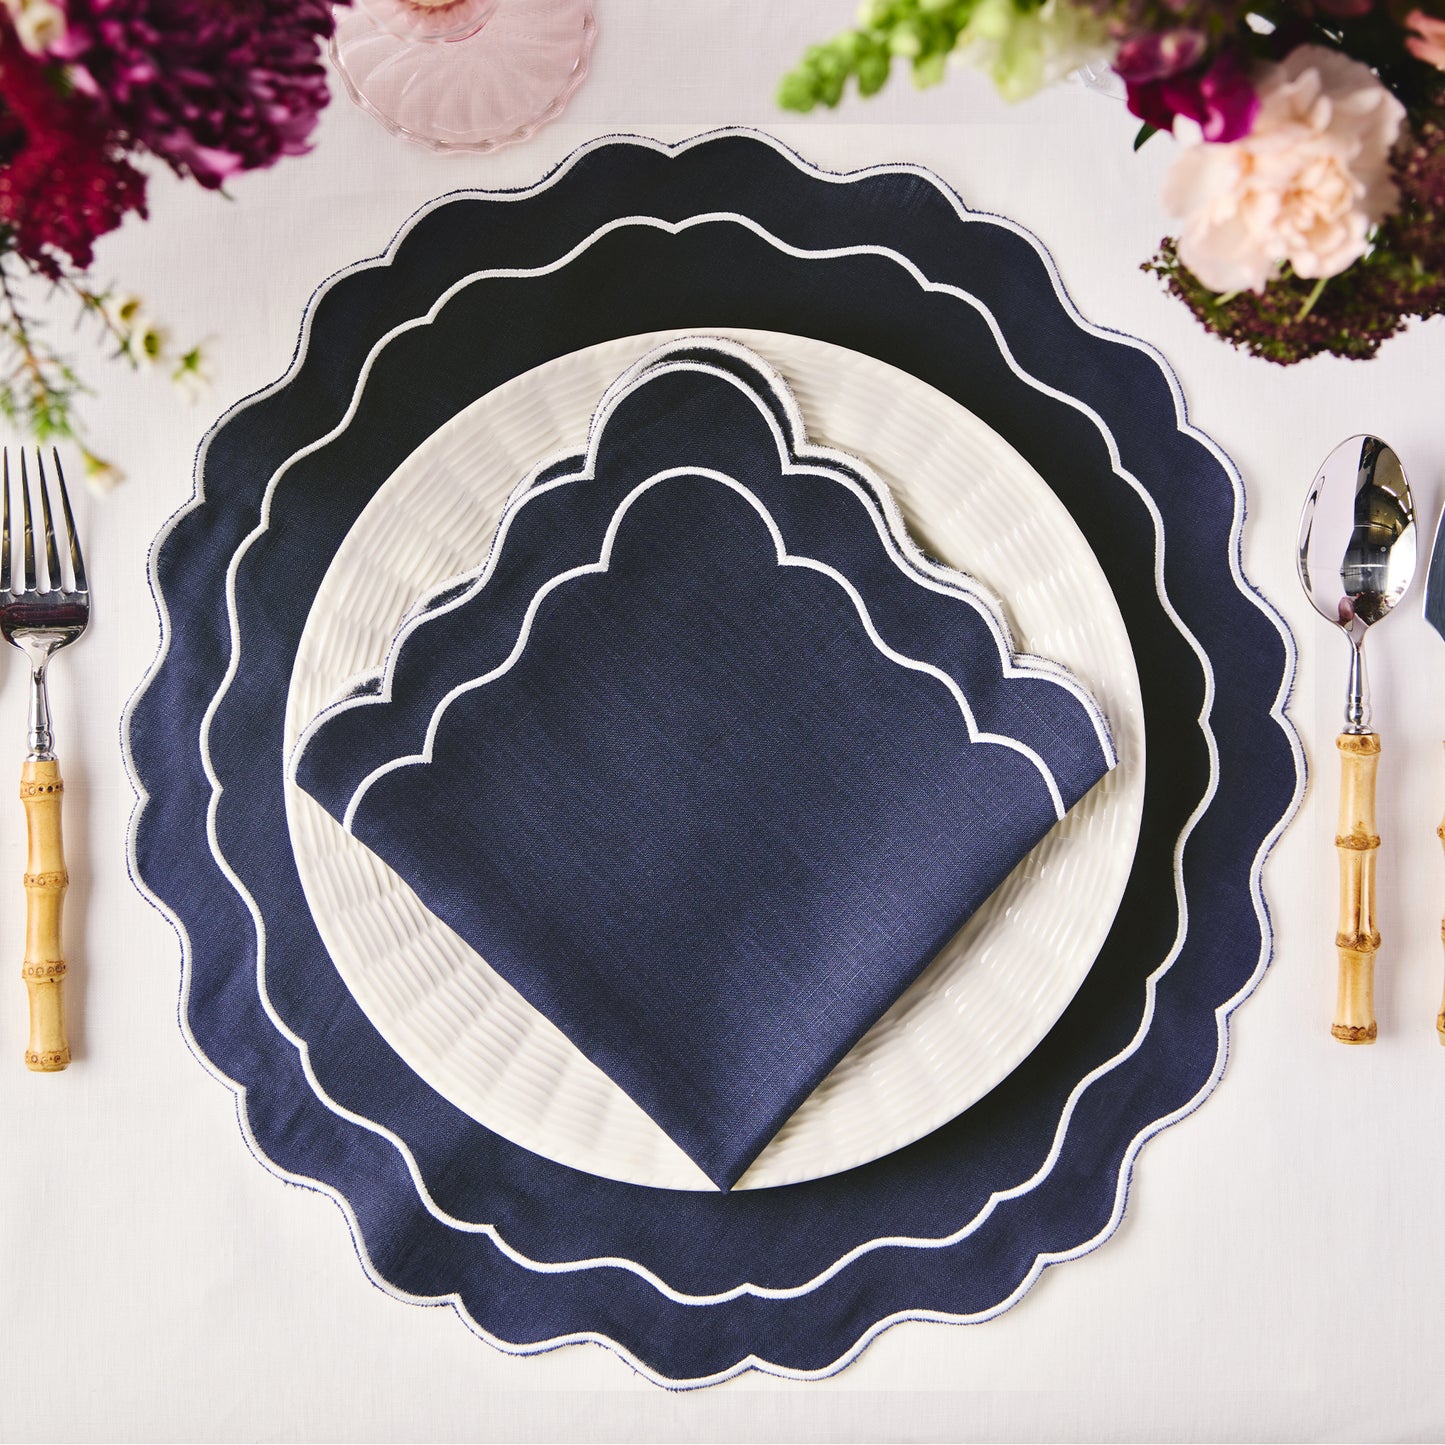 Set of 4 - Pure Linen Scalloped Edged Placemat - Oxford Blue